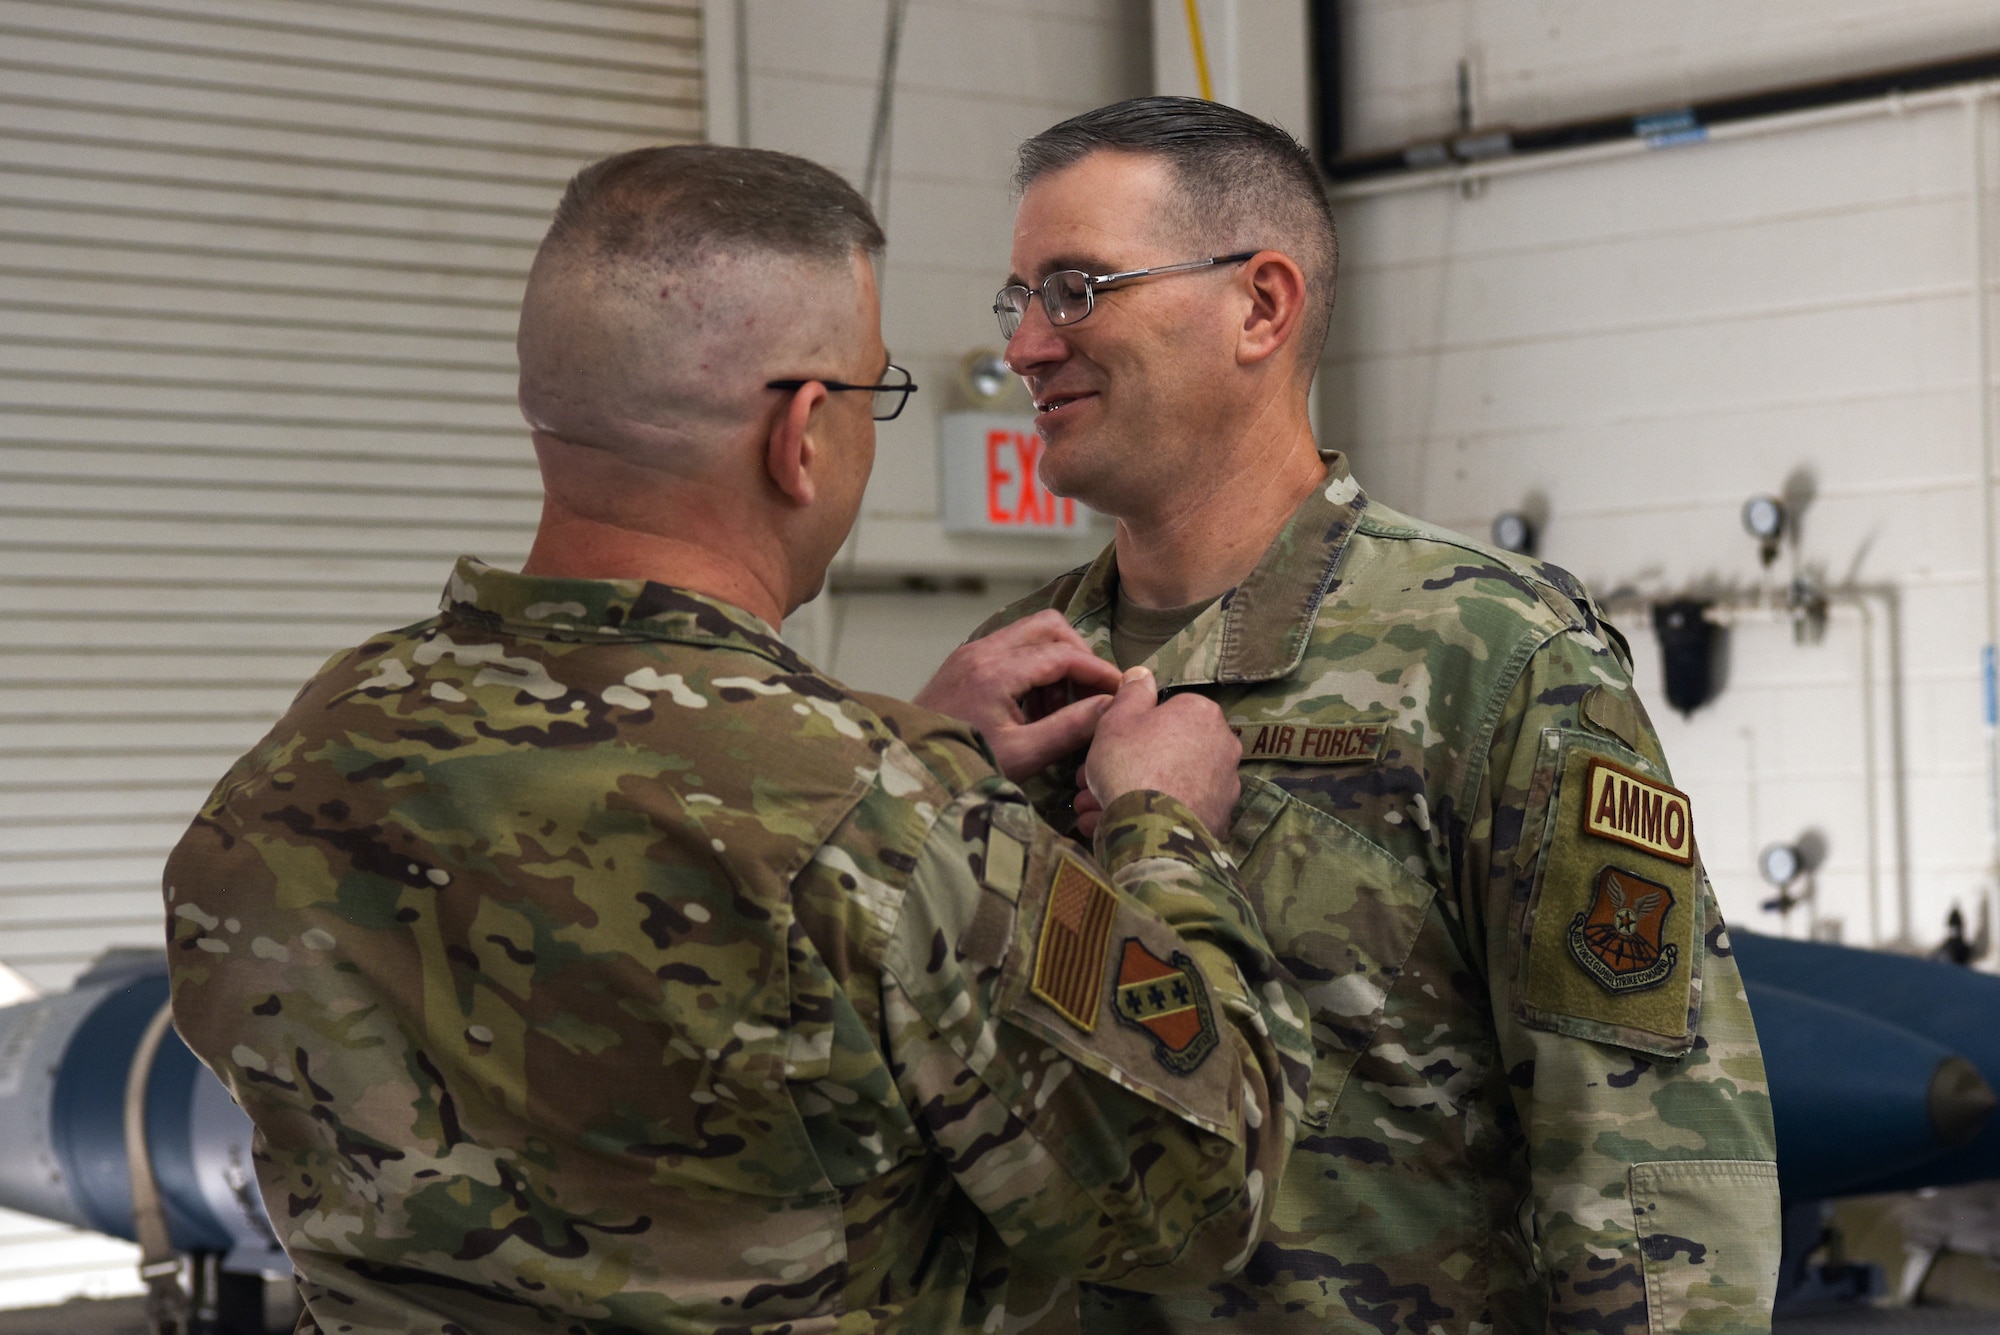 Col. Joshua Pope, 7th Maintenance Squadron commander, clips the Meritorious Service Medal onto Maj. Jeffrey Erwin, outgoing commander of the 7th Munitions Squadron on Dyess Air Force Base Texas, 16 Jun 2022. Erwin oversaw munitions operations for multiple Bomber Task Force deployments during his tenure as commander. (U.S. Air Force photo by Senior Airman Sophia Robello)